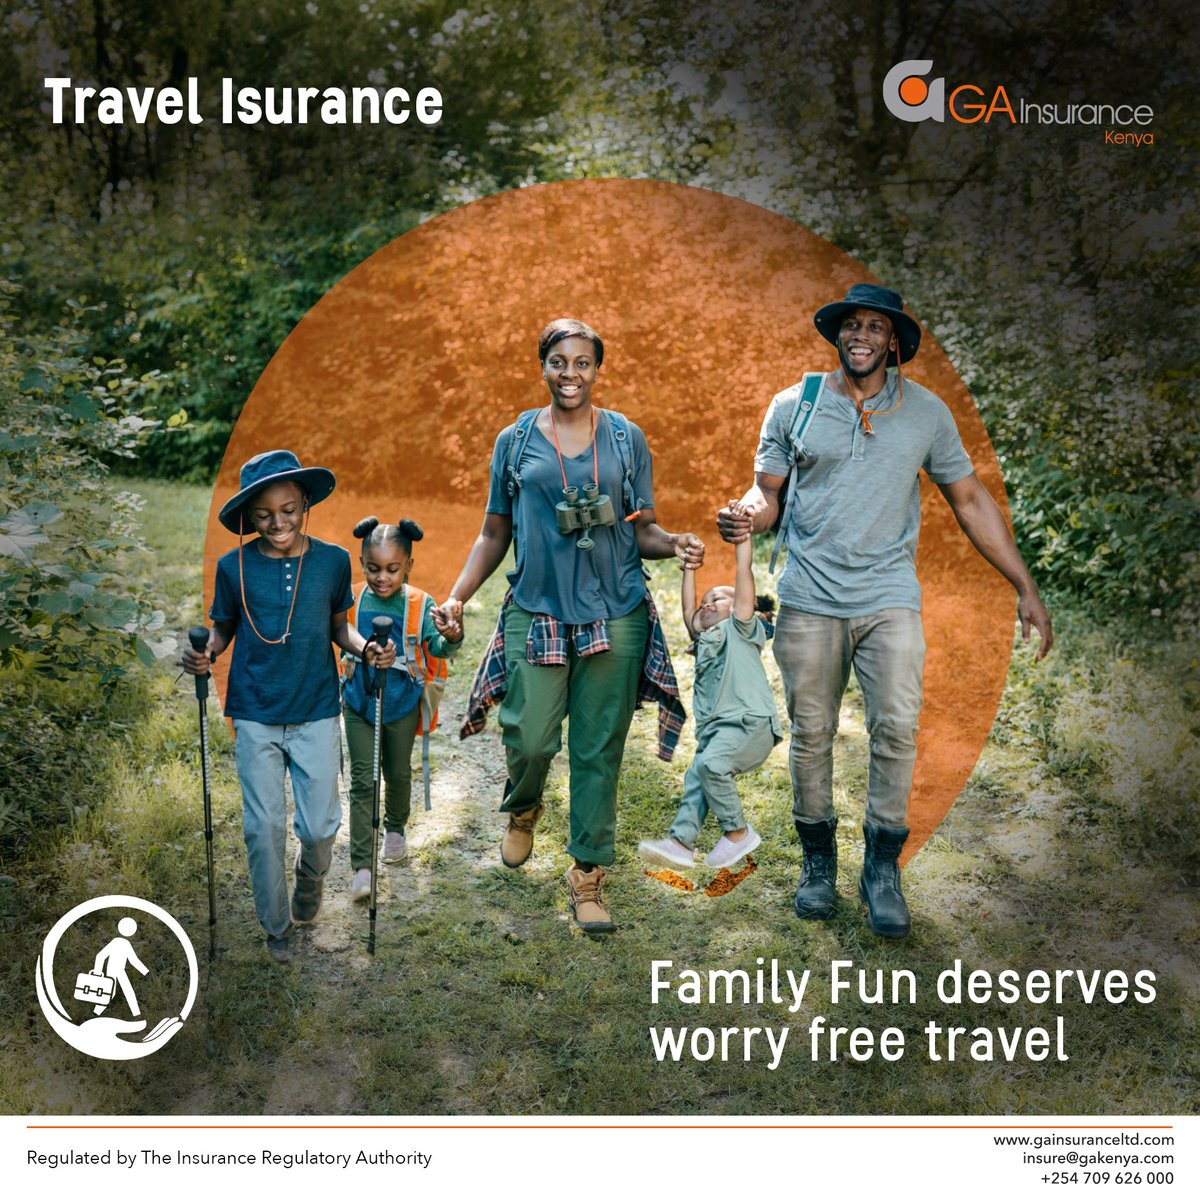 Has the #flooding got you thinking of cancelling your trips?✈️Well don’t! Visit our website gainsuranceltd.com/ke/insurance/t… and get a GA Travel Insurance cover and be prepared for the unexpected! We'll remind you to pack what matters most; Your Peace of Mind!
#GaFunFriday 
#restassured